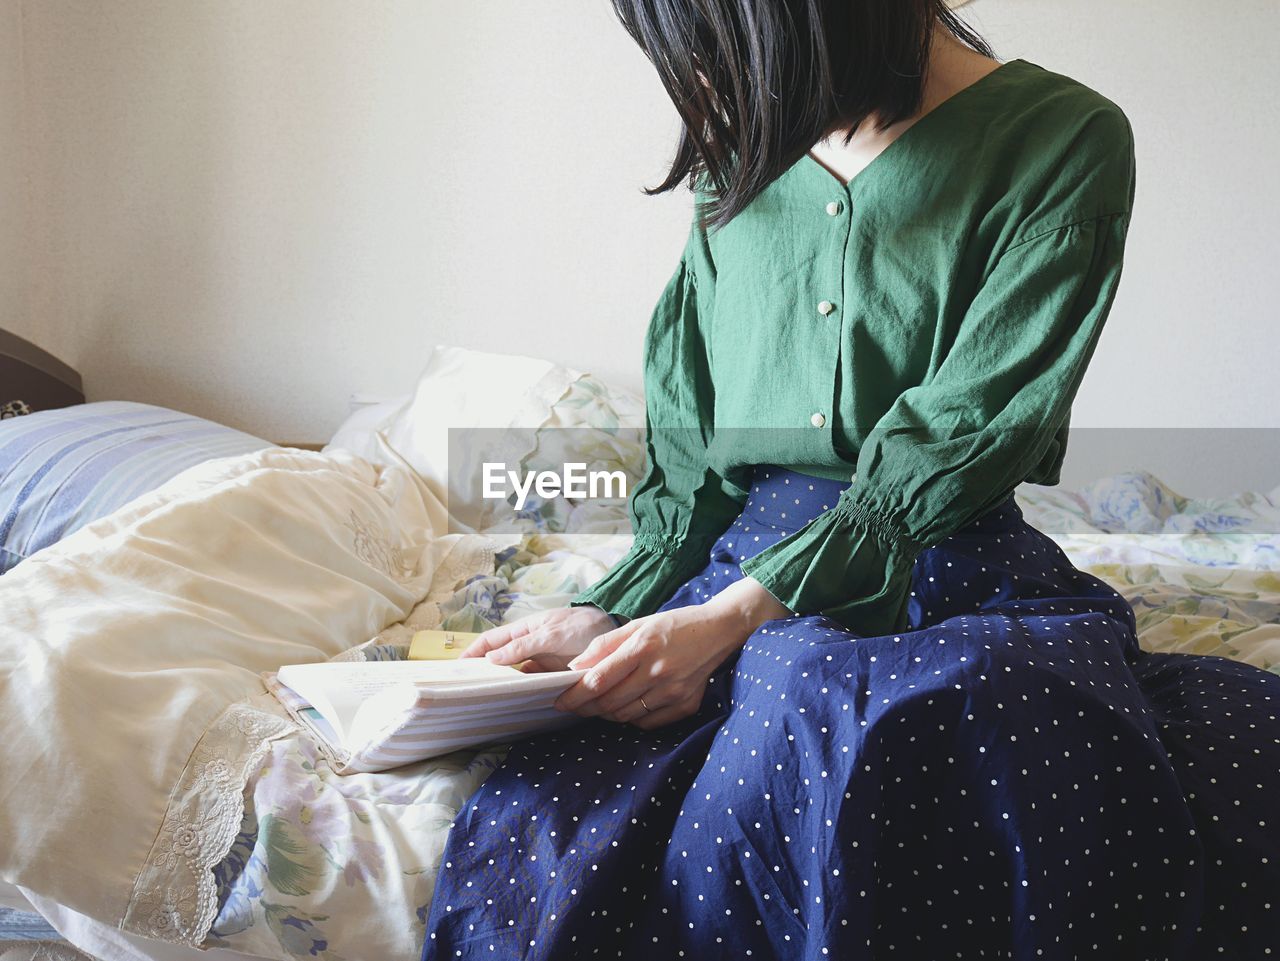 Reading a book on the bed